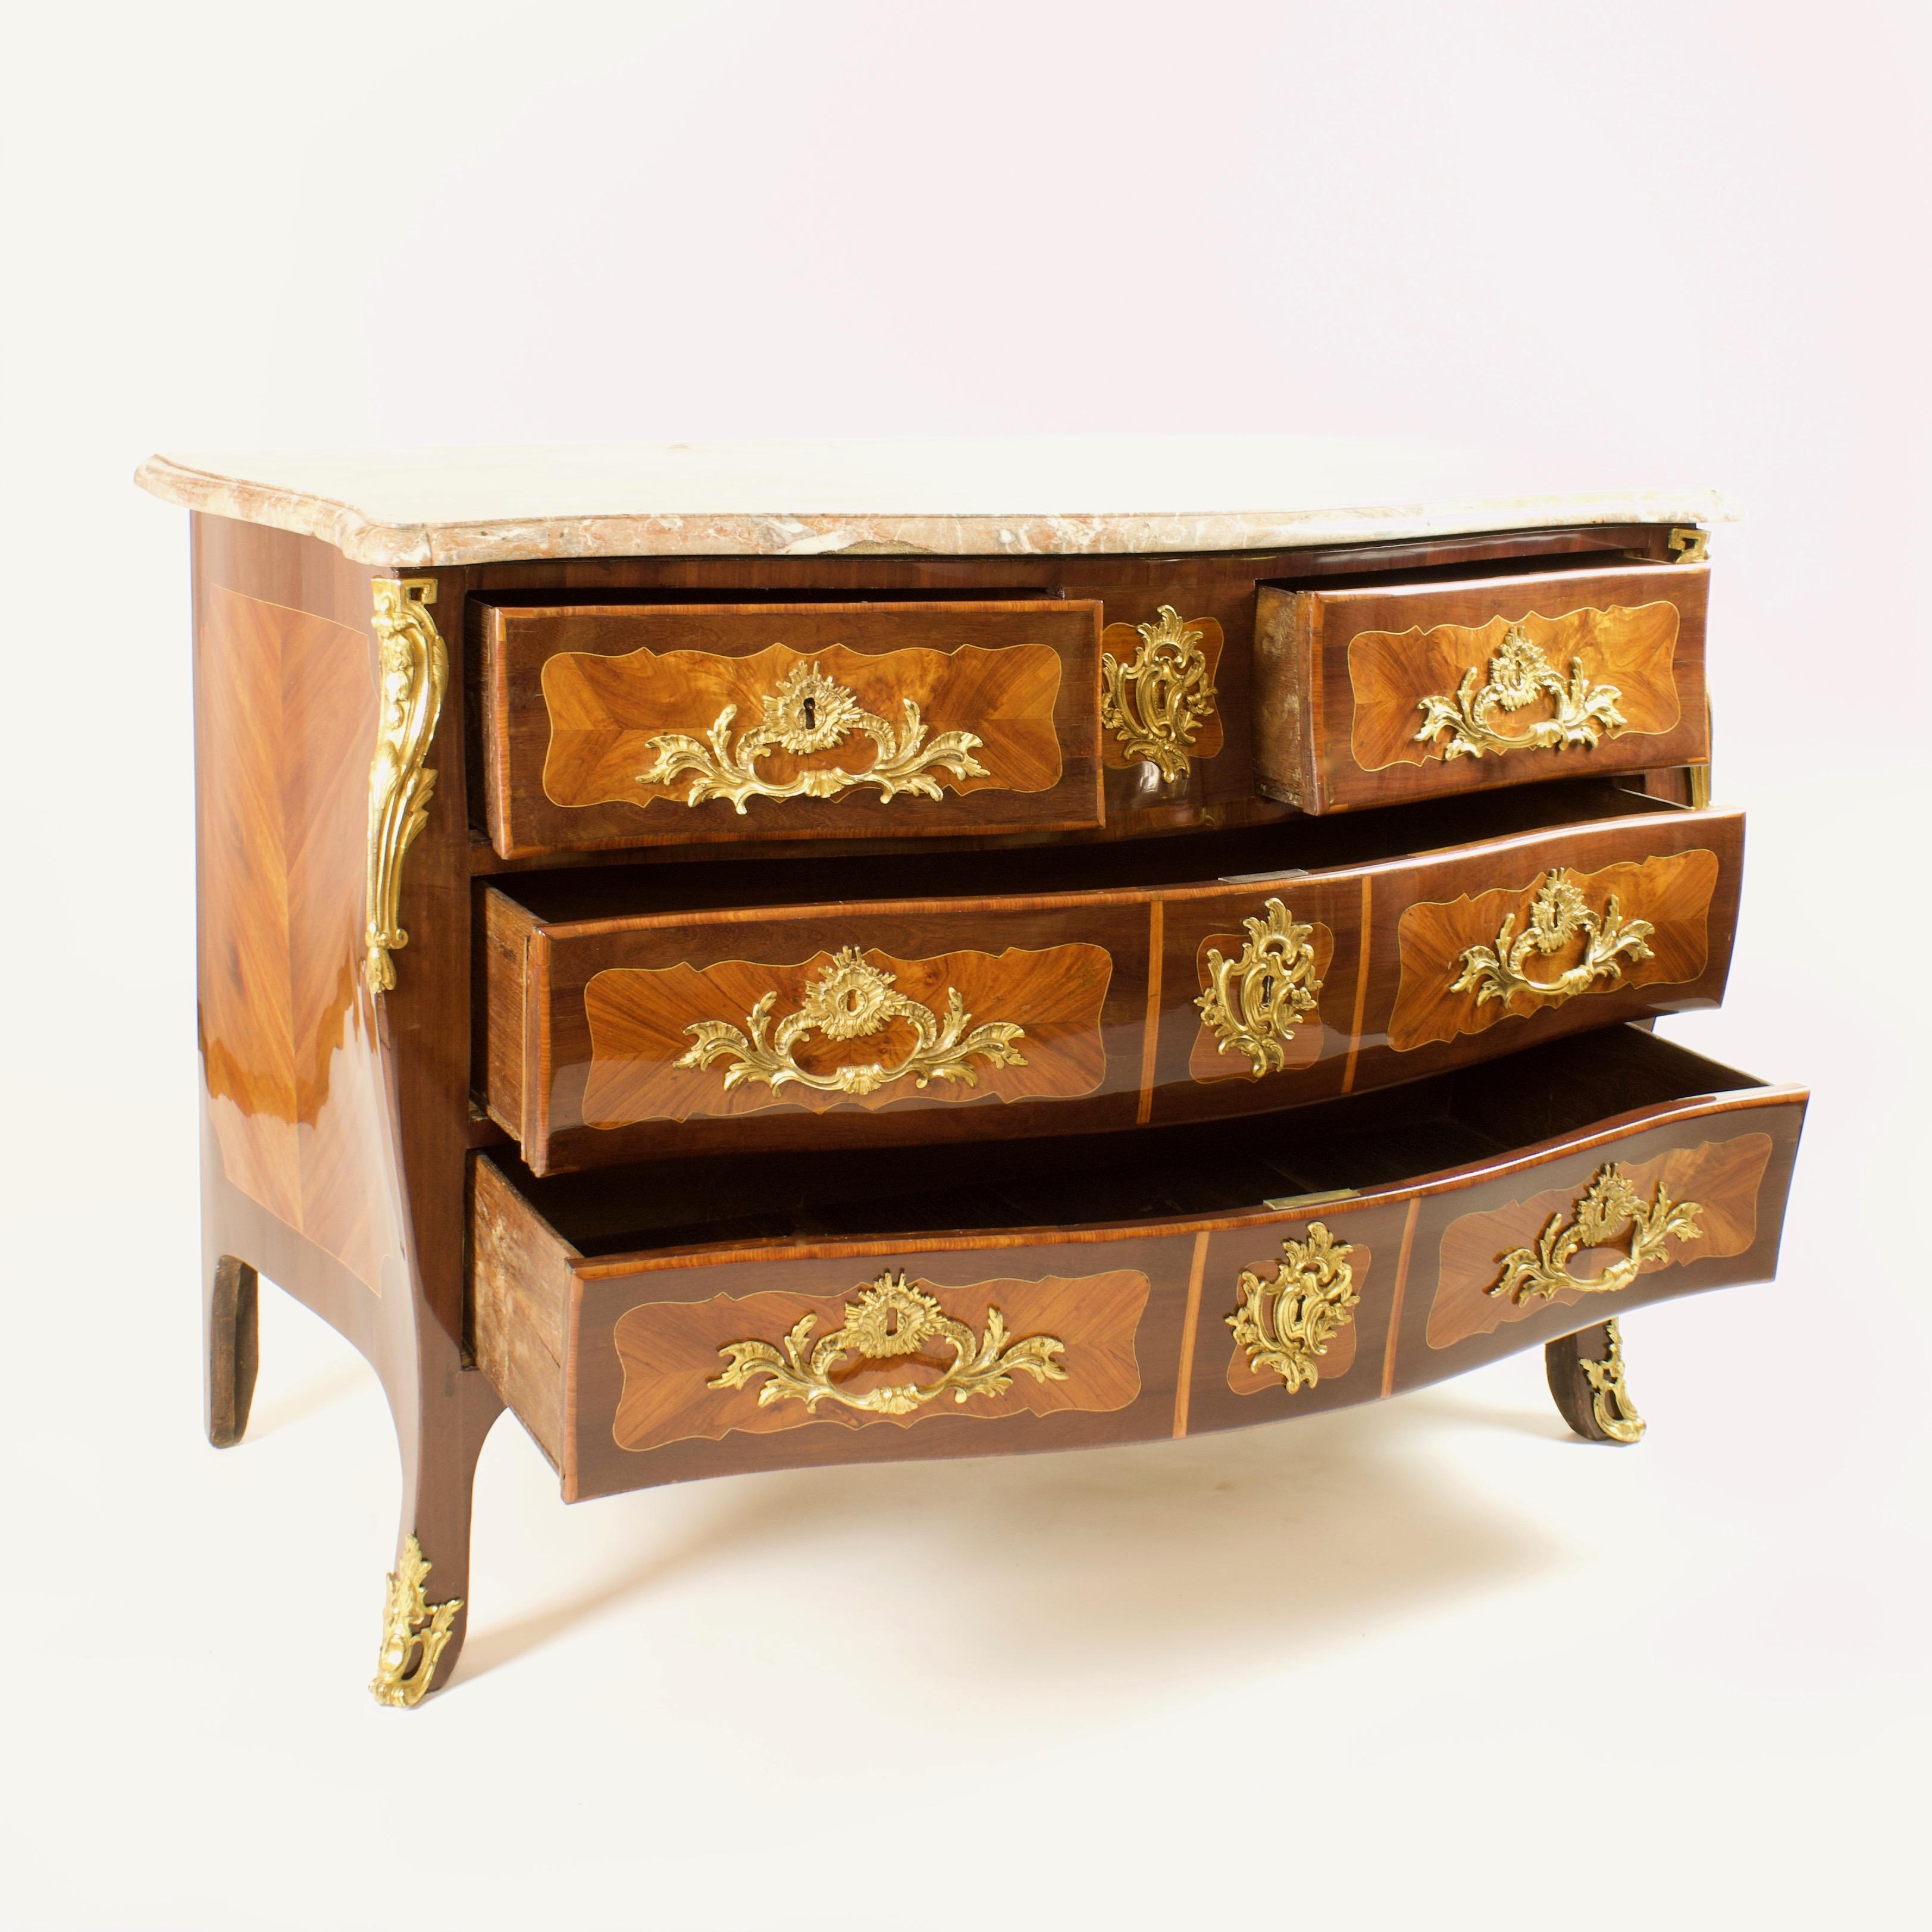 French Louis XV Marquetry Gilt-Bronze Commode 'En Tombeau', Stamped 